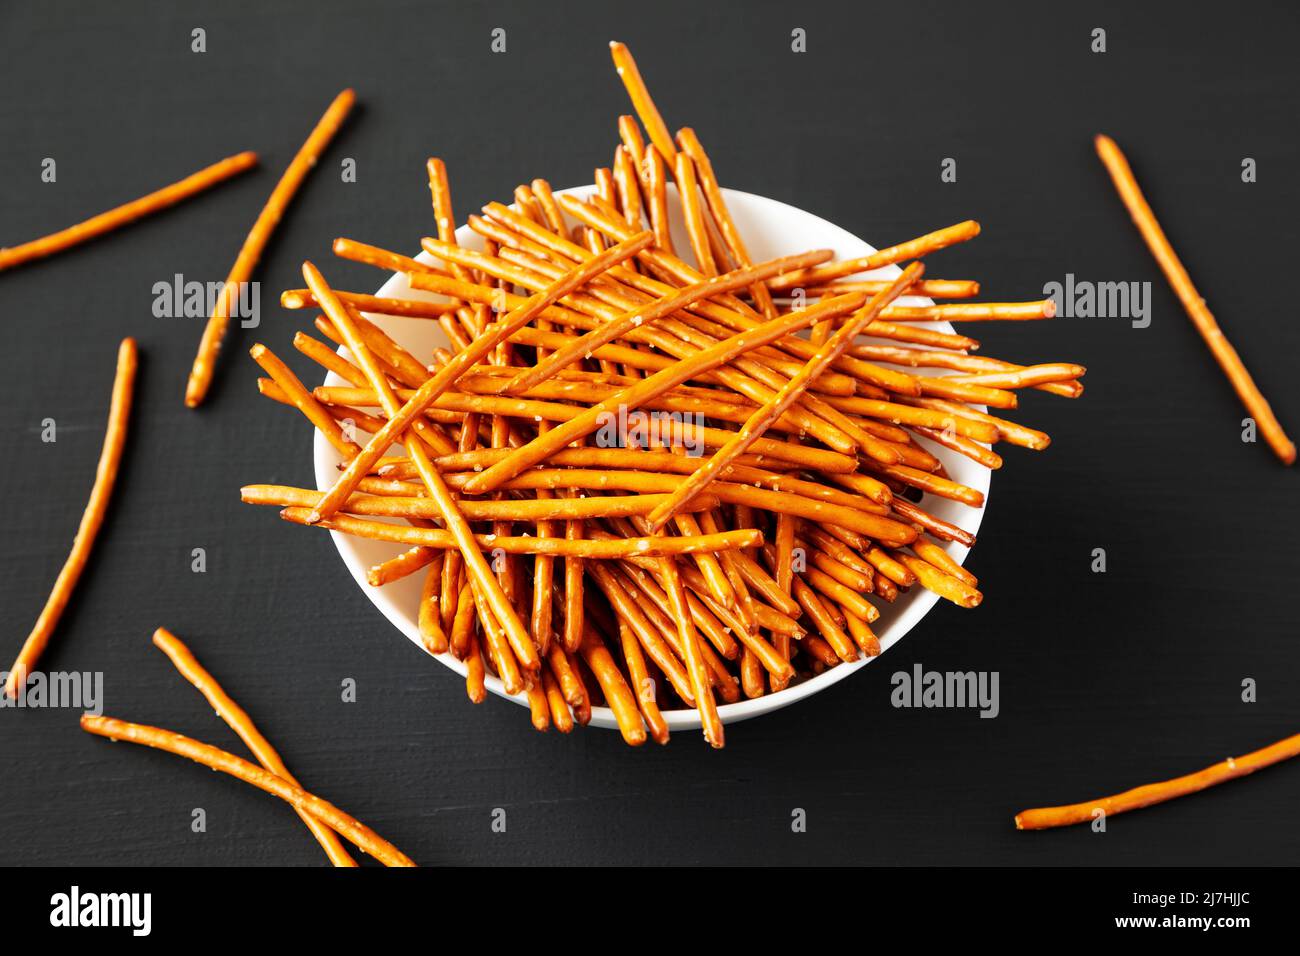 Crunchy Salty Baked Pretzel Sticks in a Bowl on a black background, side view. Stock Photo